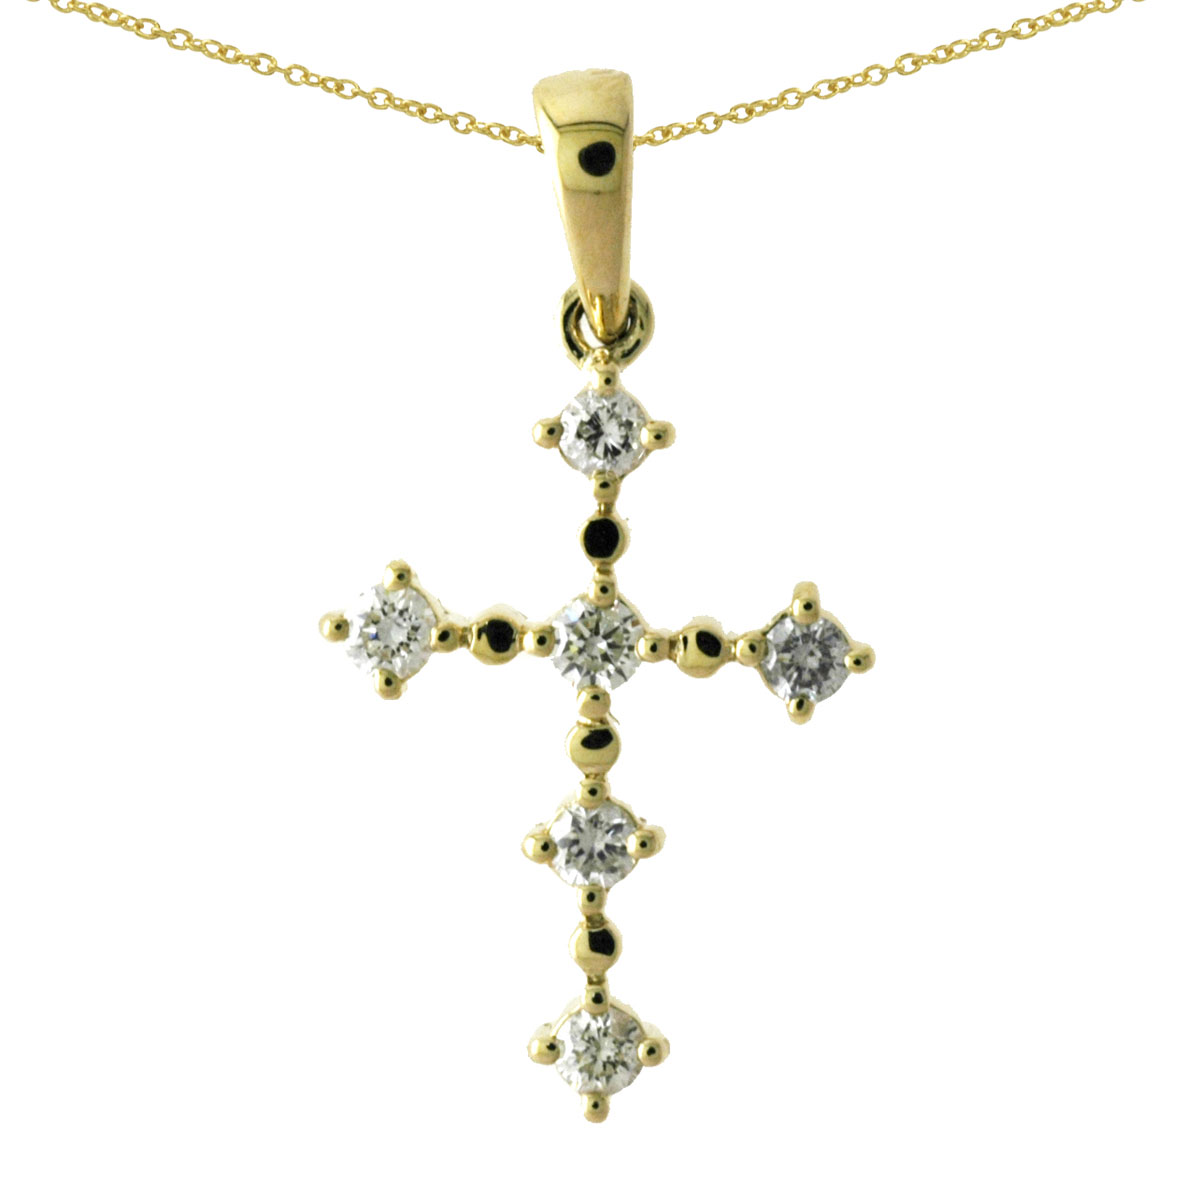 JCX2794: 14k yellow gold cross featuring .25 total ct diamonds. A modern take on a classic design.